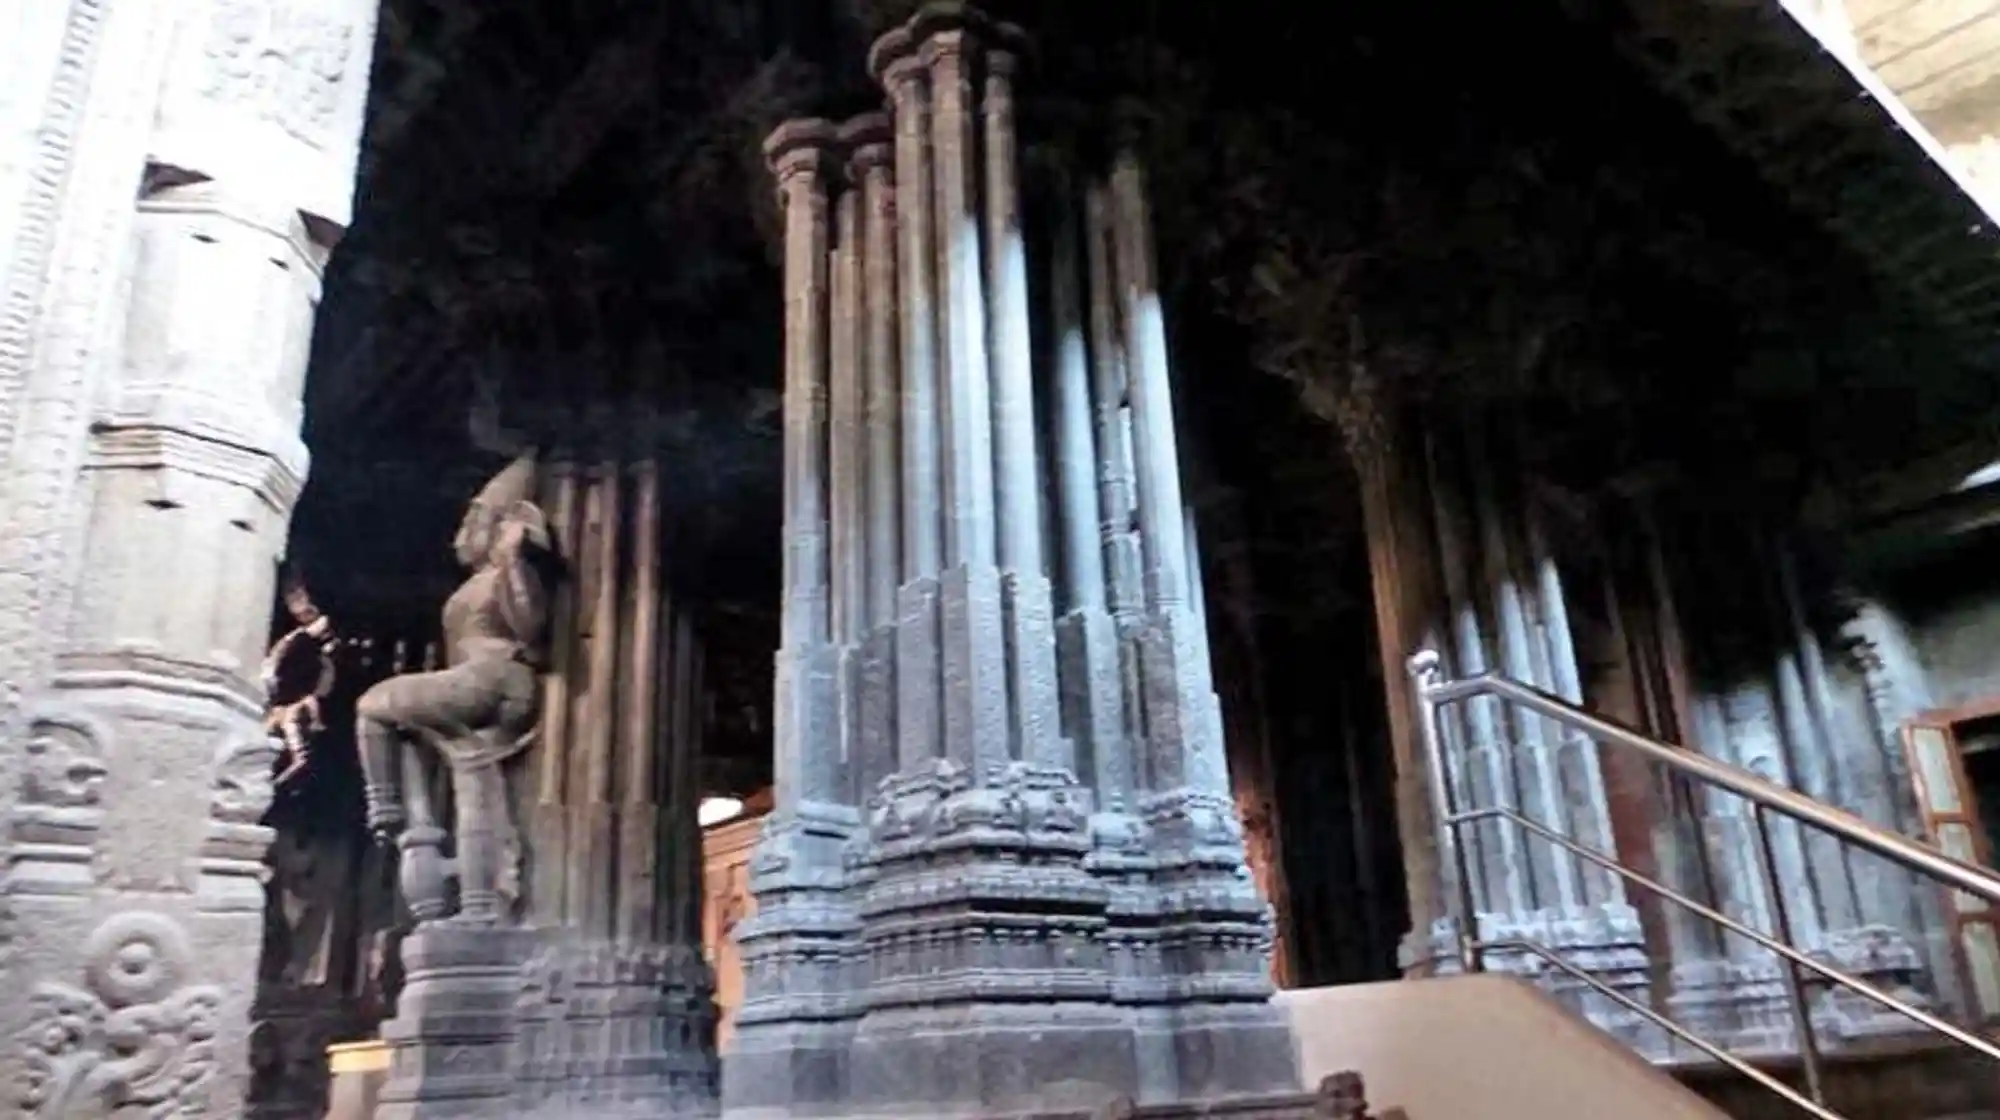 The musical pillars at the temple I Source: Deccan Chronicle